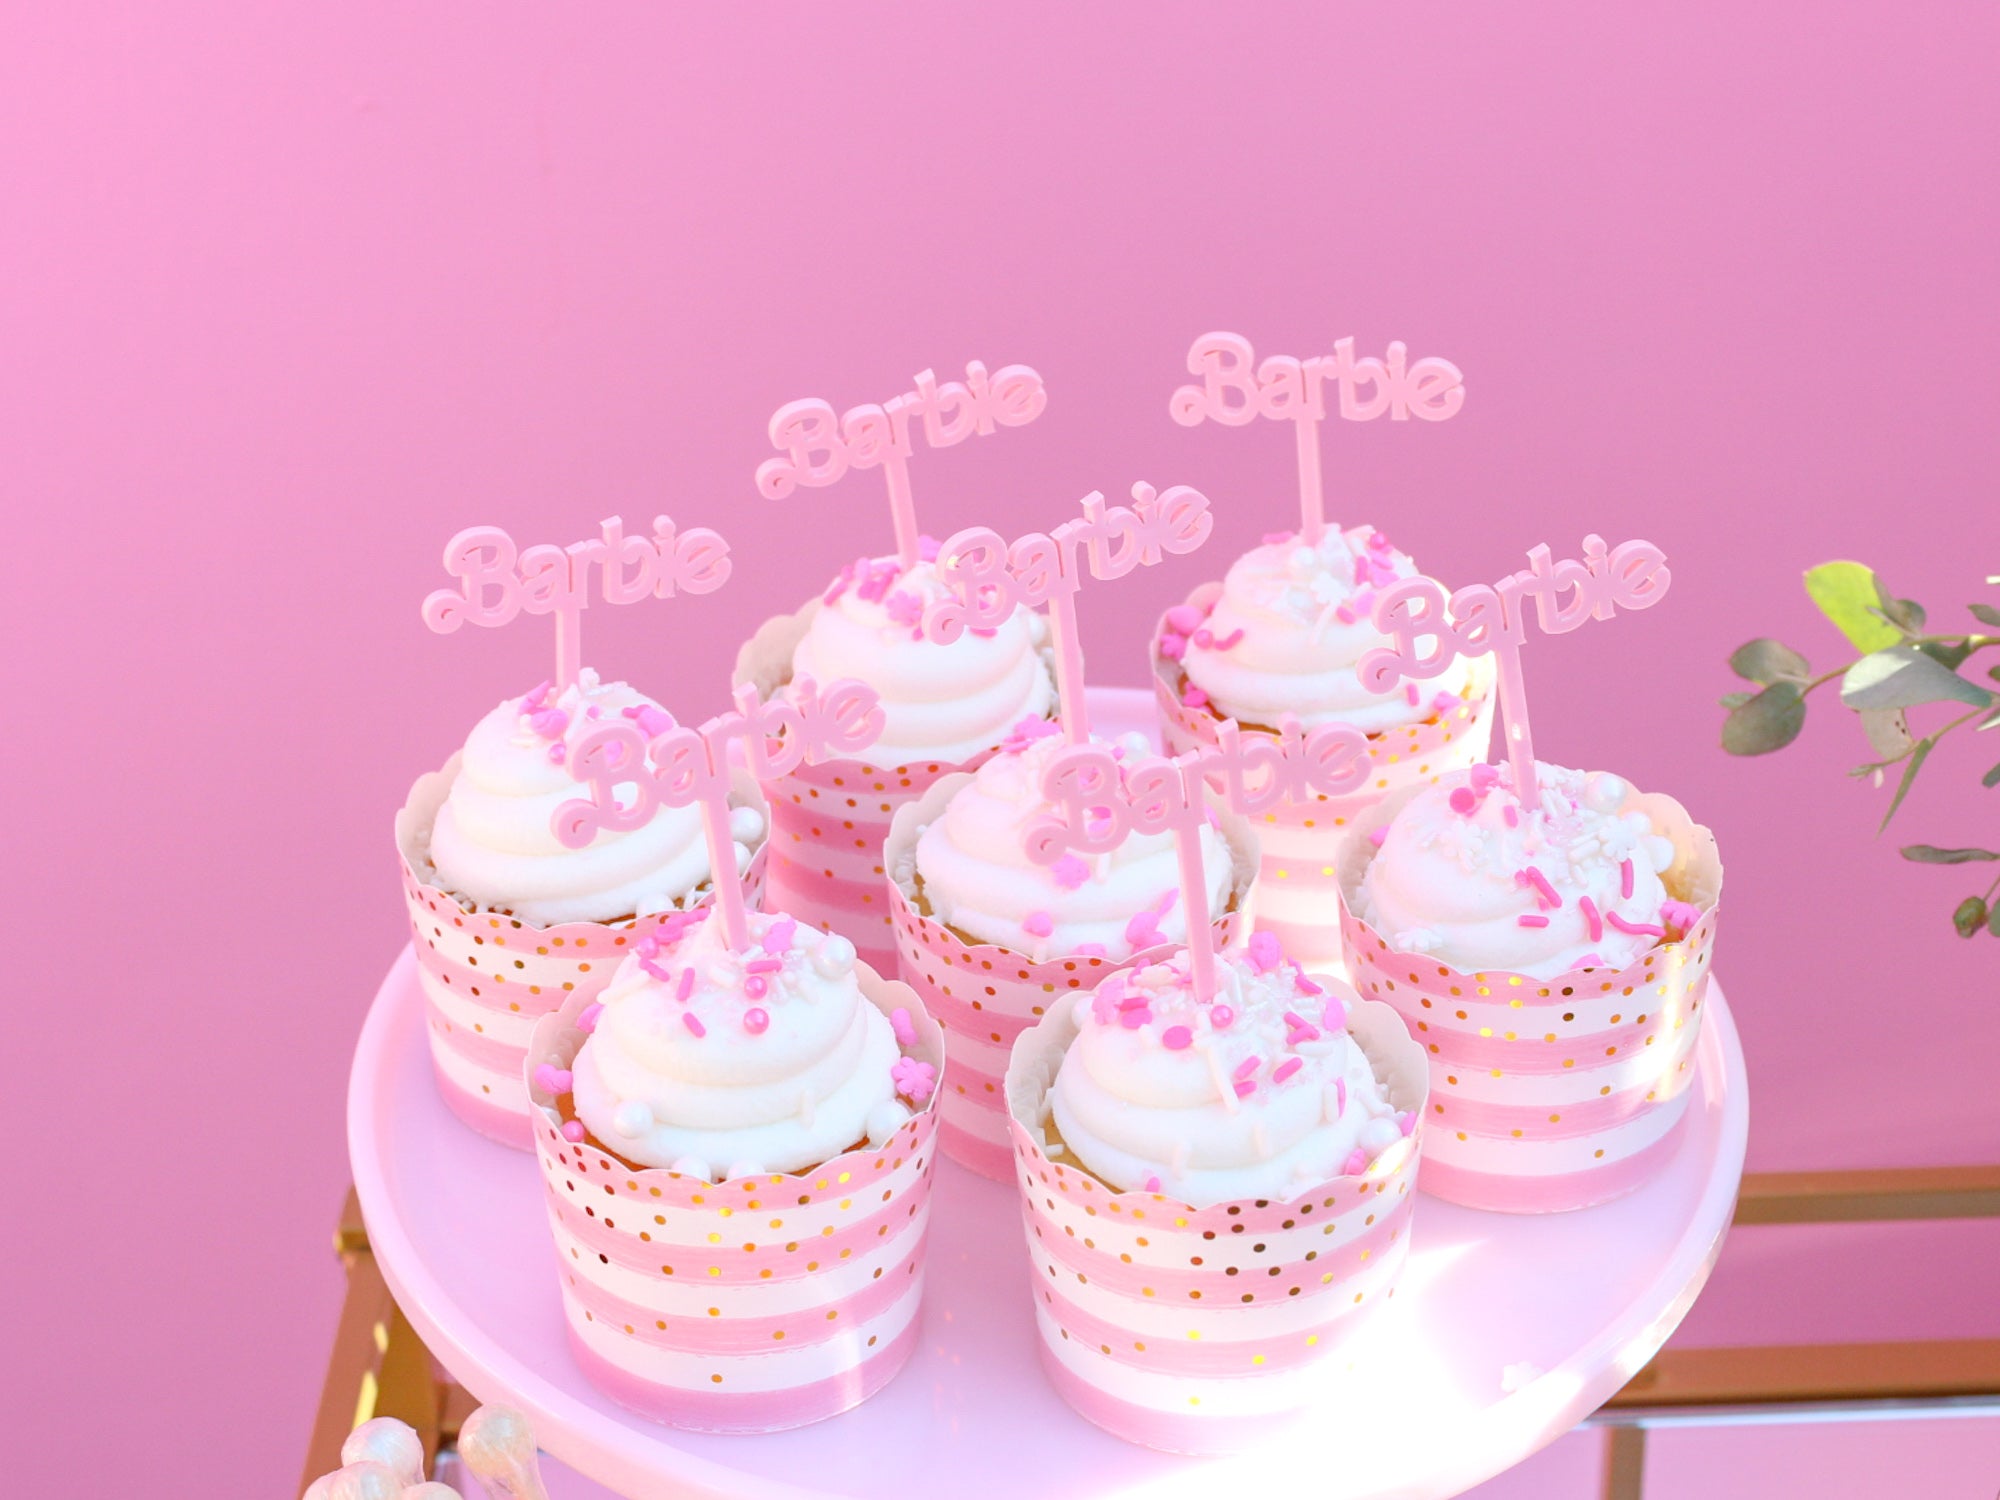 Barbie Cupcakes | The Party Darling